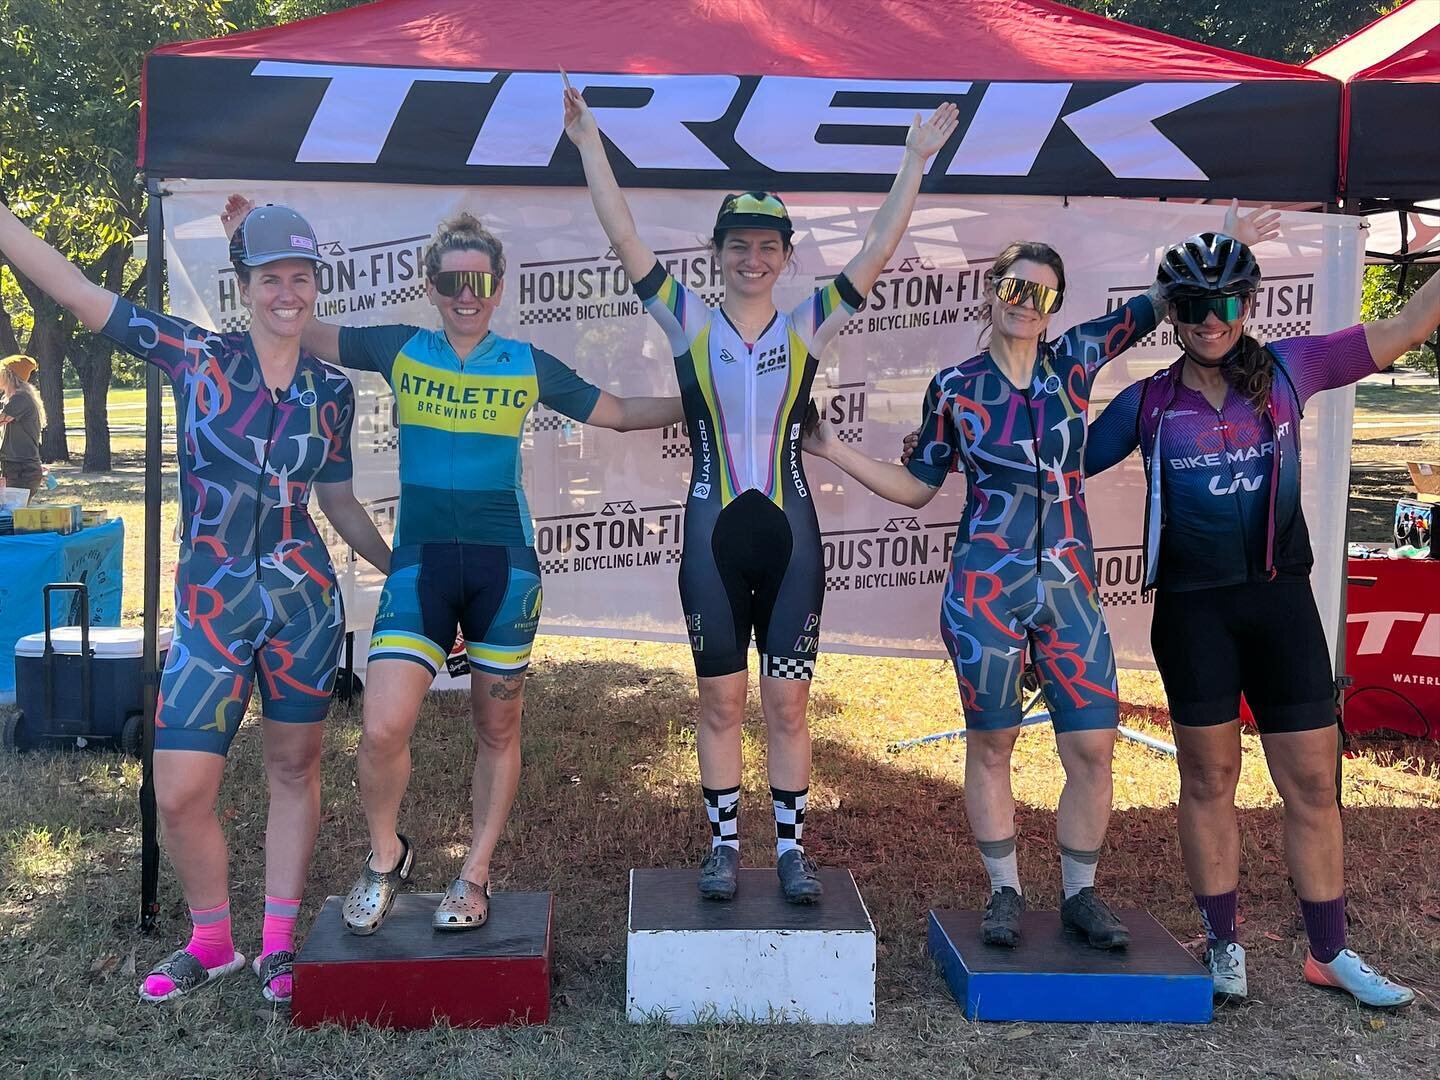 Cross is here and @emilykslack is showing everyone what&rsquo;s up!! 

Thank you @capitalcityracingtexas for a sweet course and for putting on a race so close to home. 

We&rsquo;ve got another day of racing tomorrow! If you missed today, there&rsquo